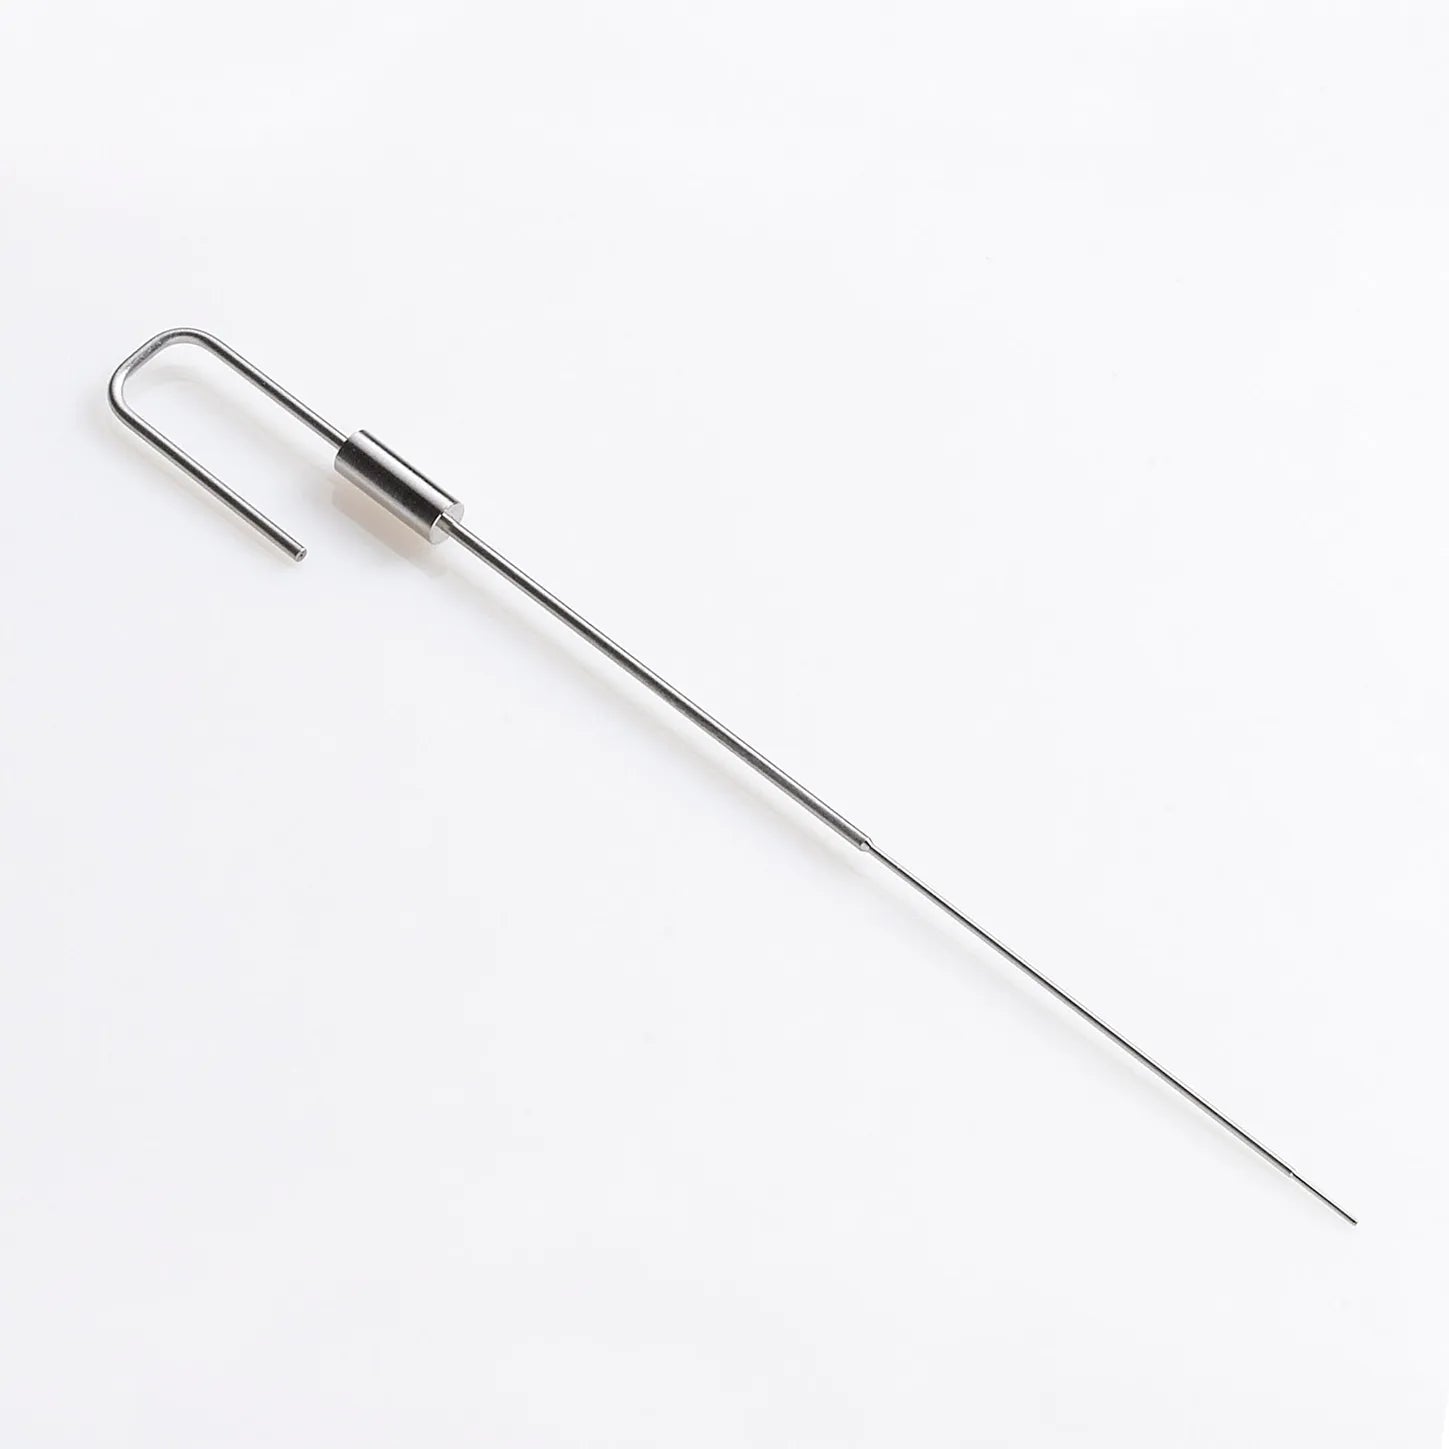 Injector Needle, Comparable to Perkin Elmer # N2930023